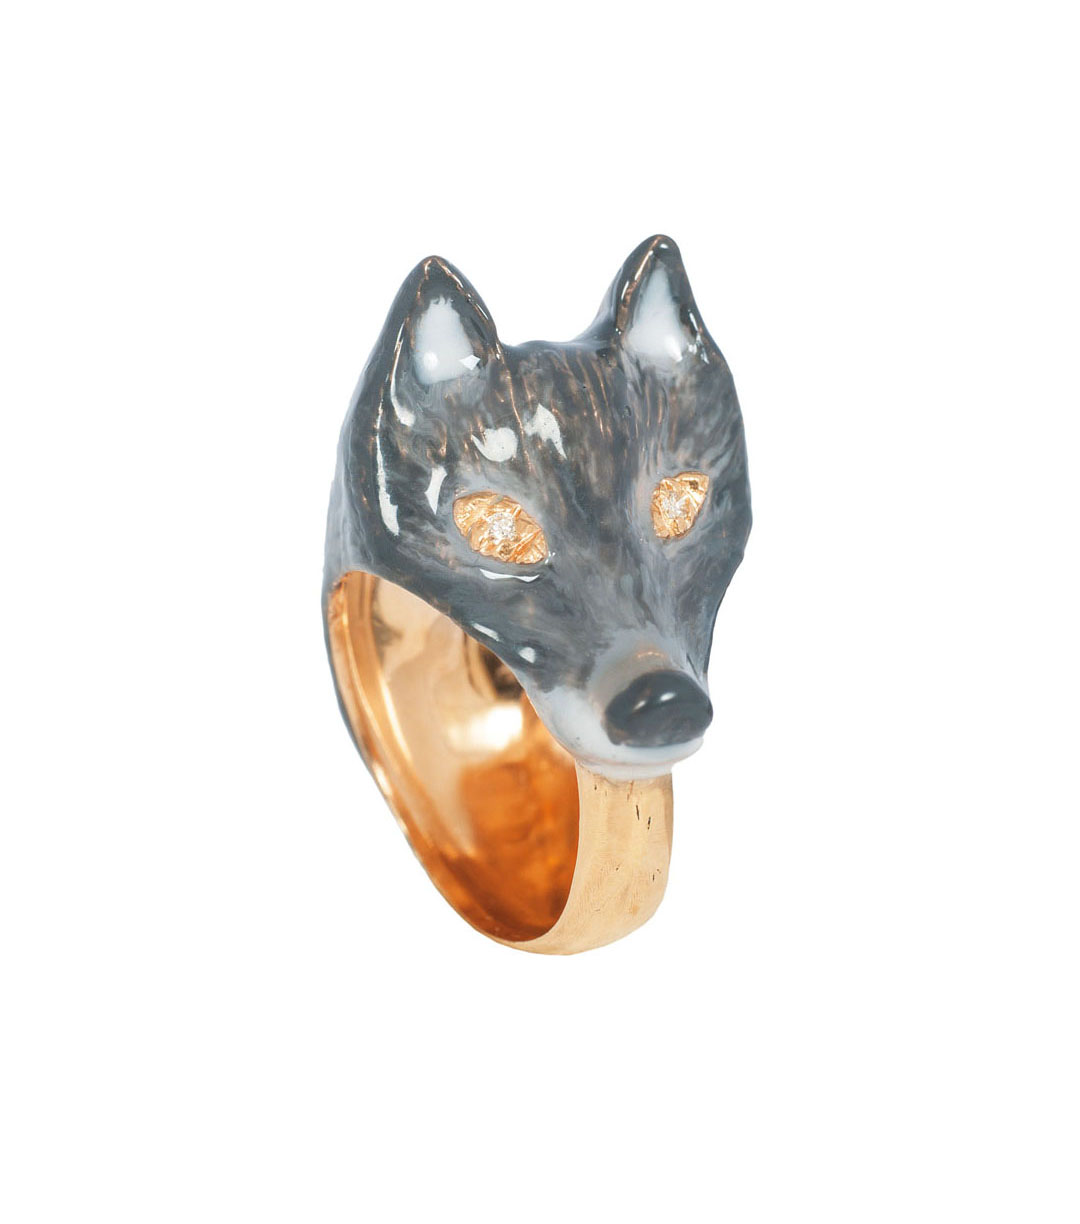 A rare ring in shaped of a wolf